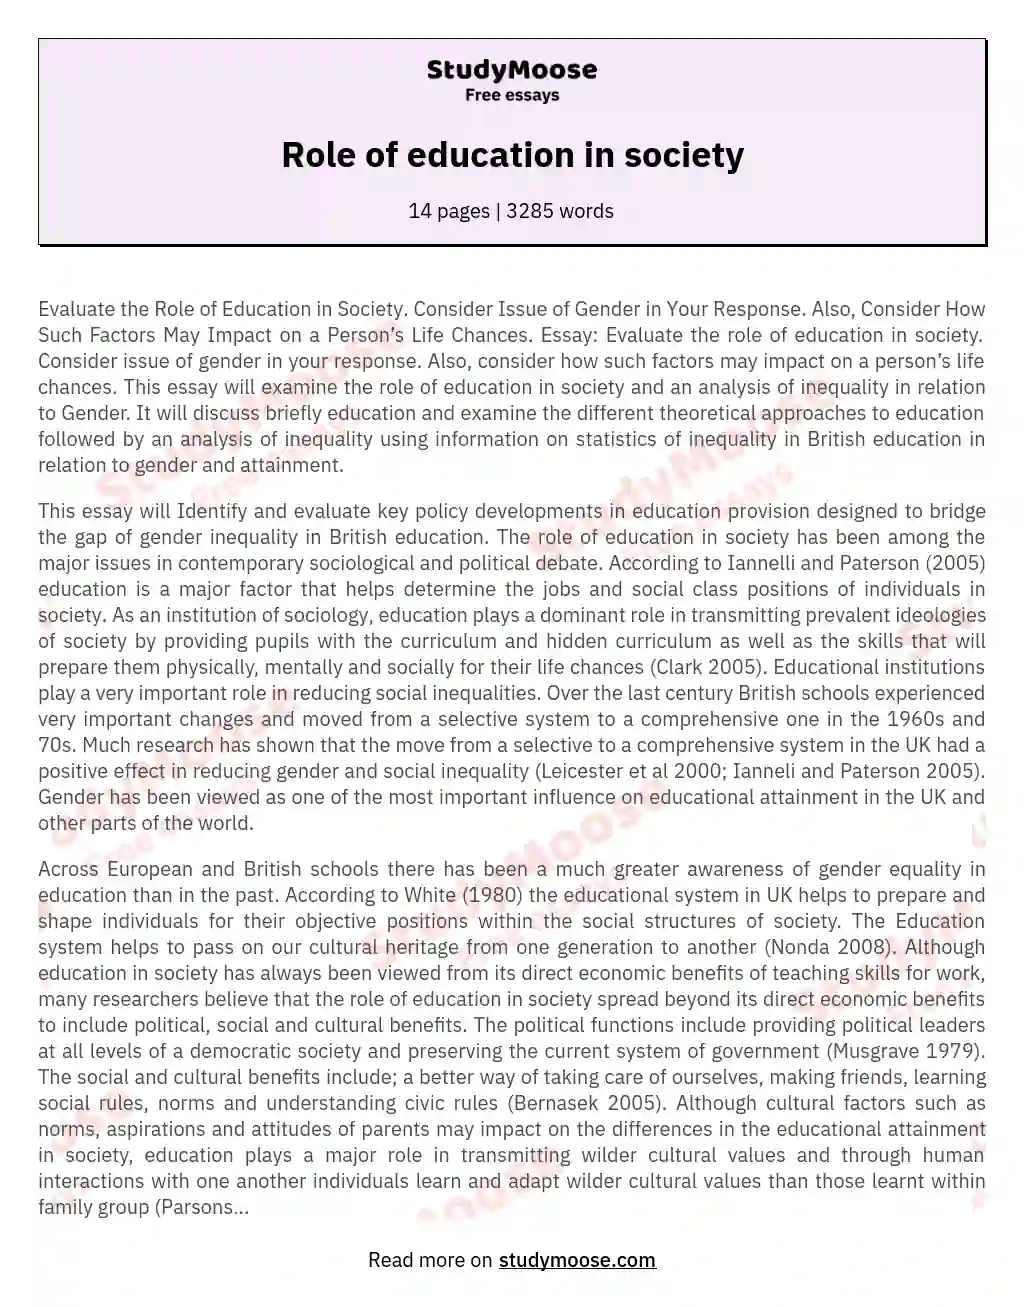 what is the role of education in society essay